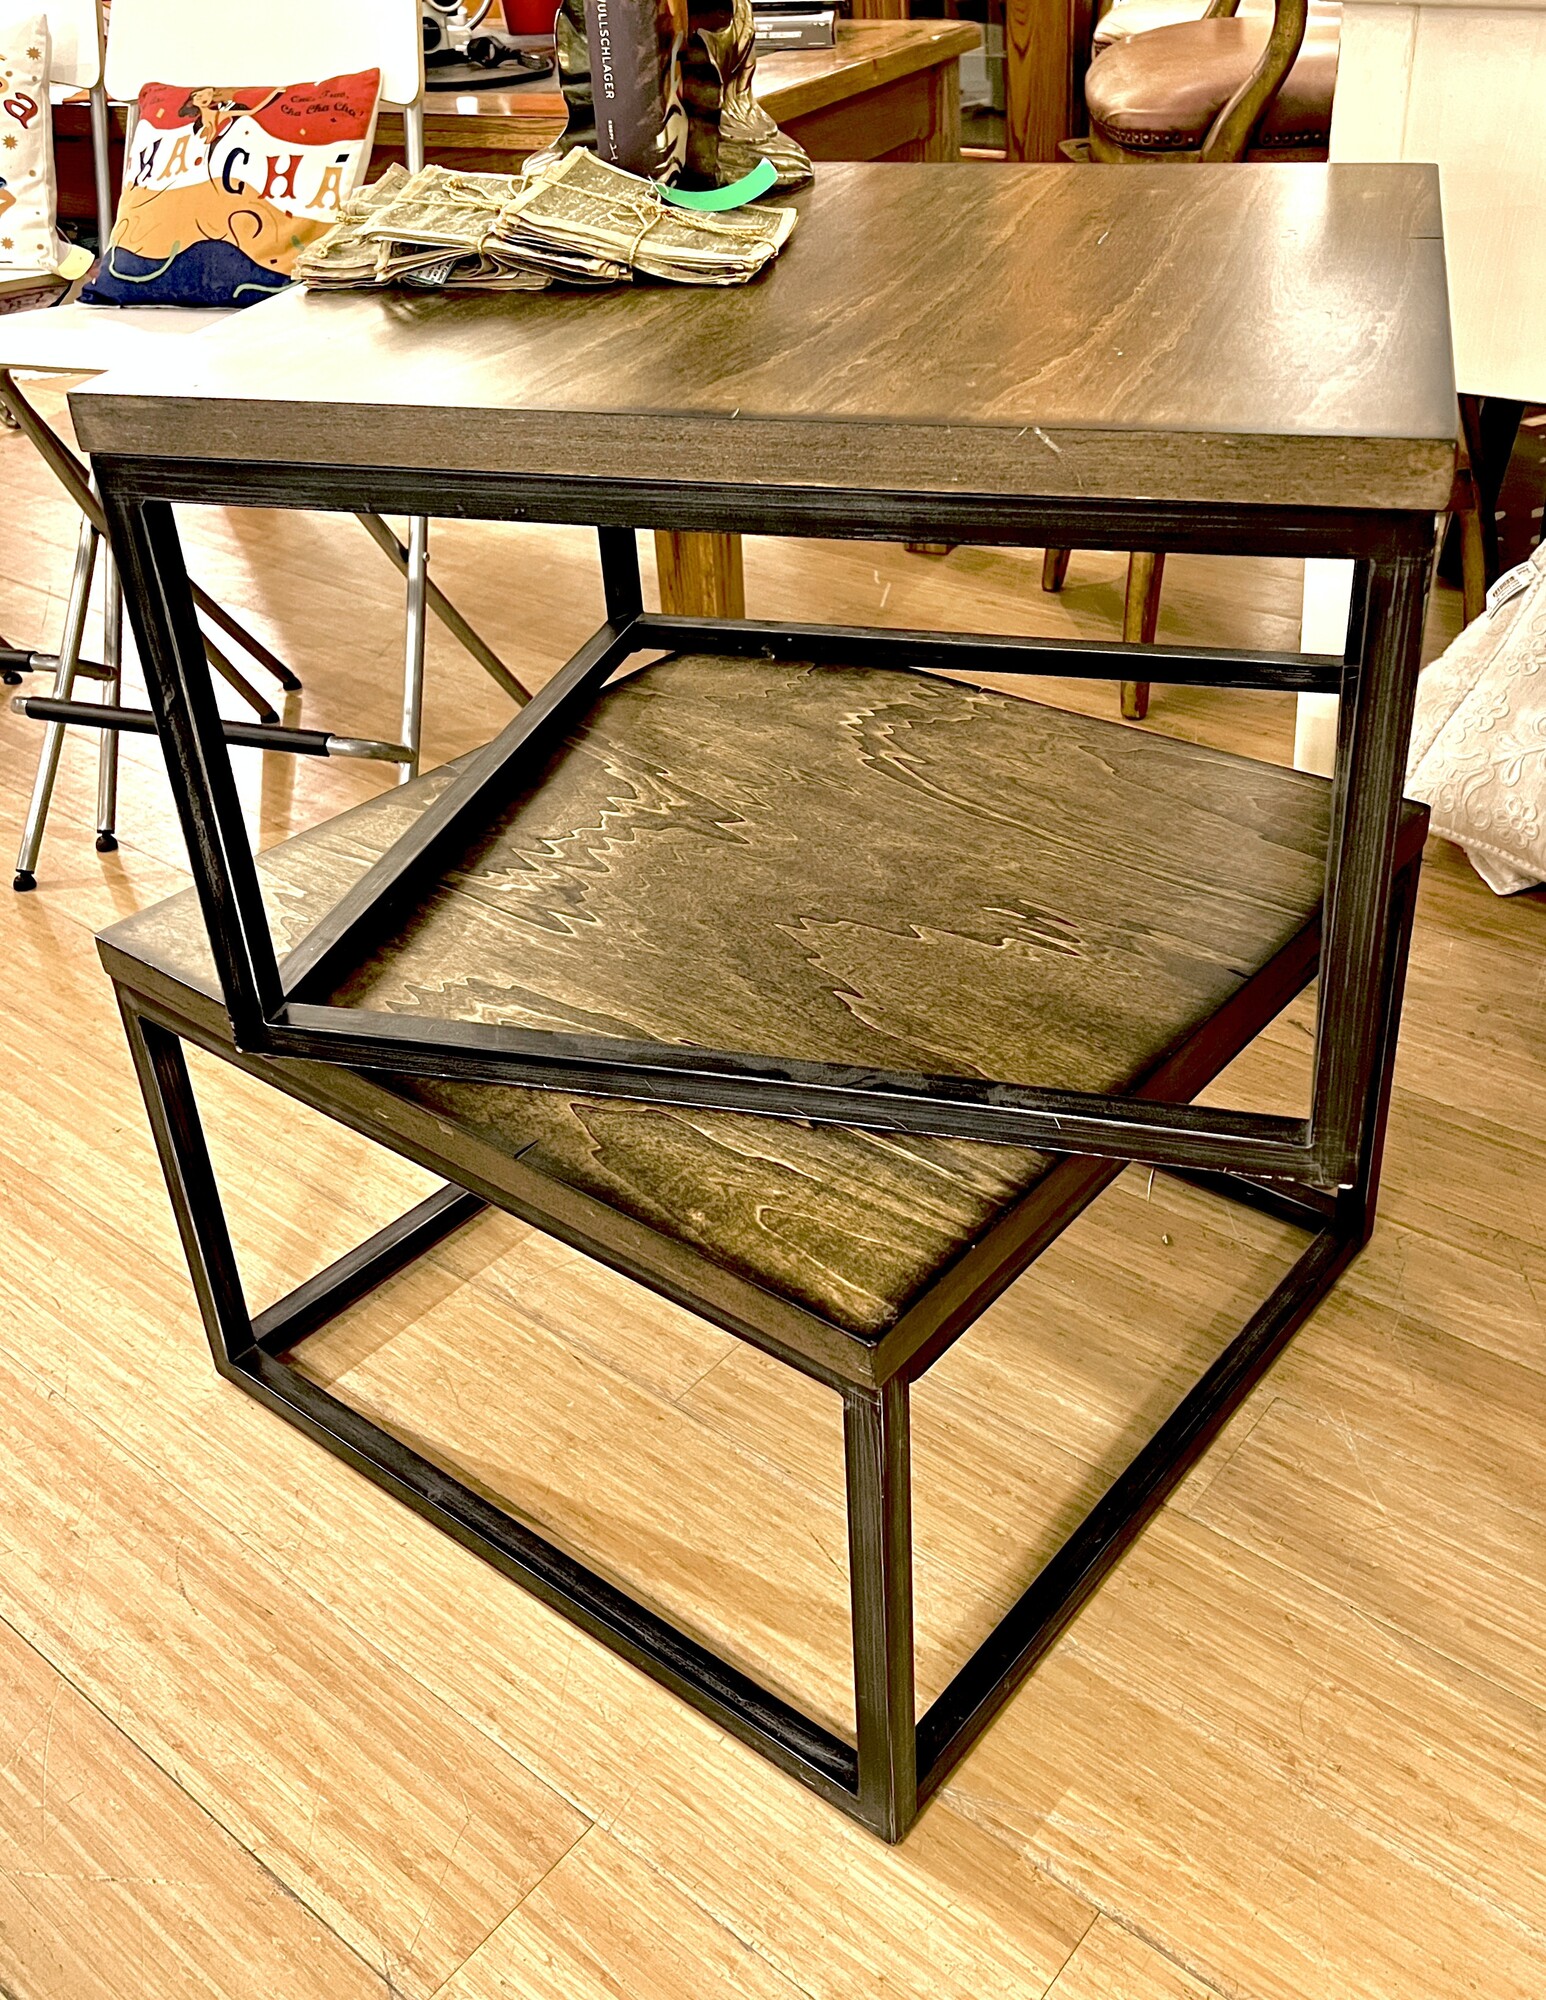 Wood & Metal accent table, Size: 26x26x16

Second one available Item #1109